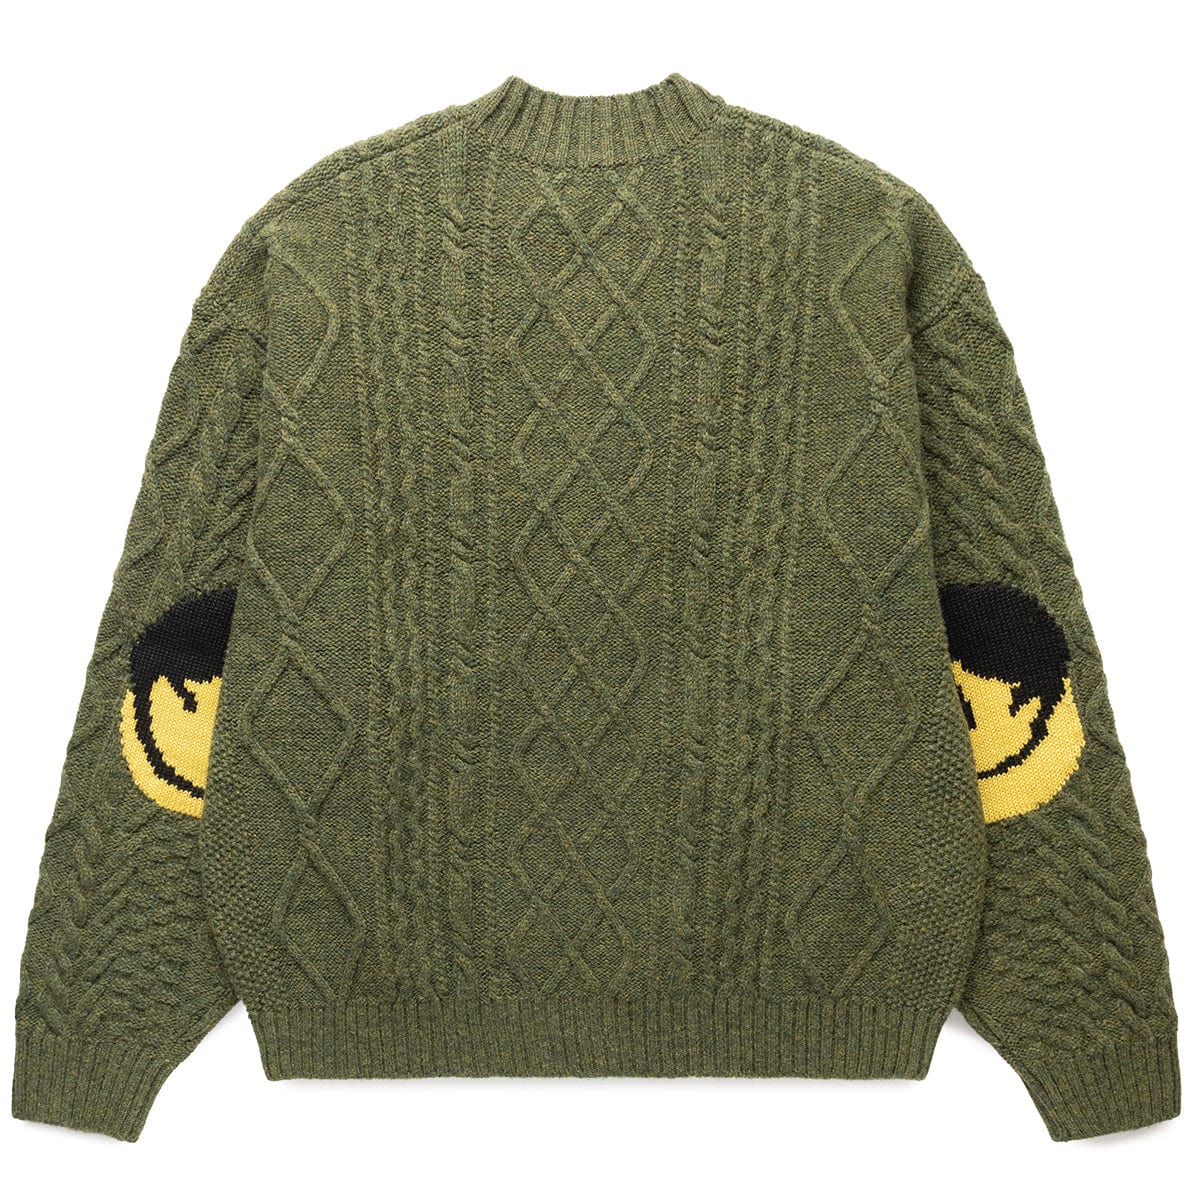 5G WOOL CABLE KNIT ELBOW-CATPITAL SWEATER